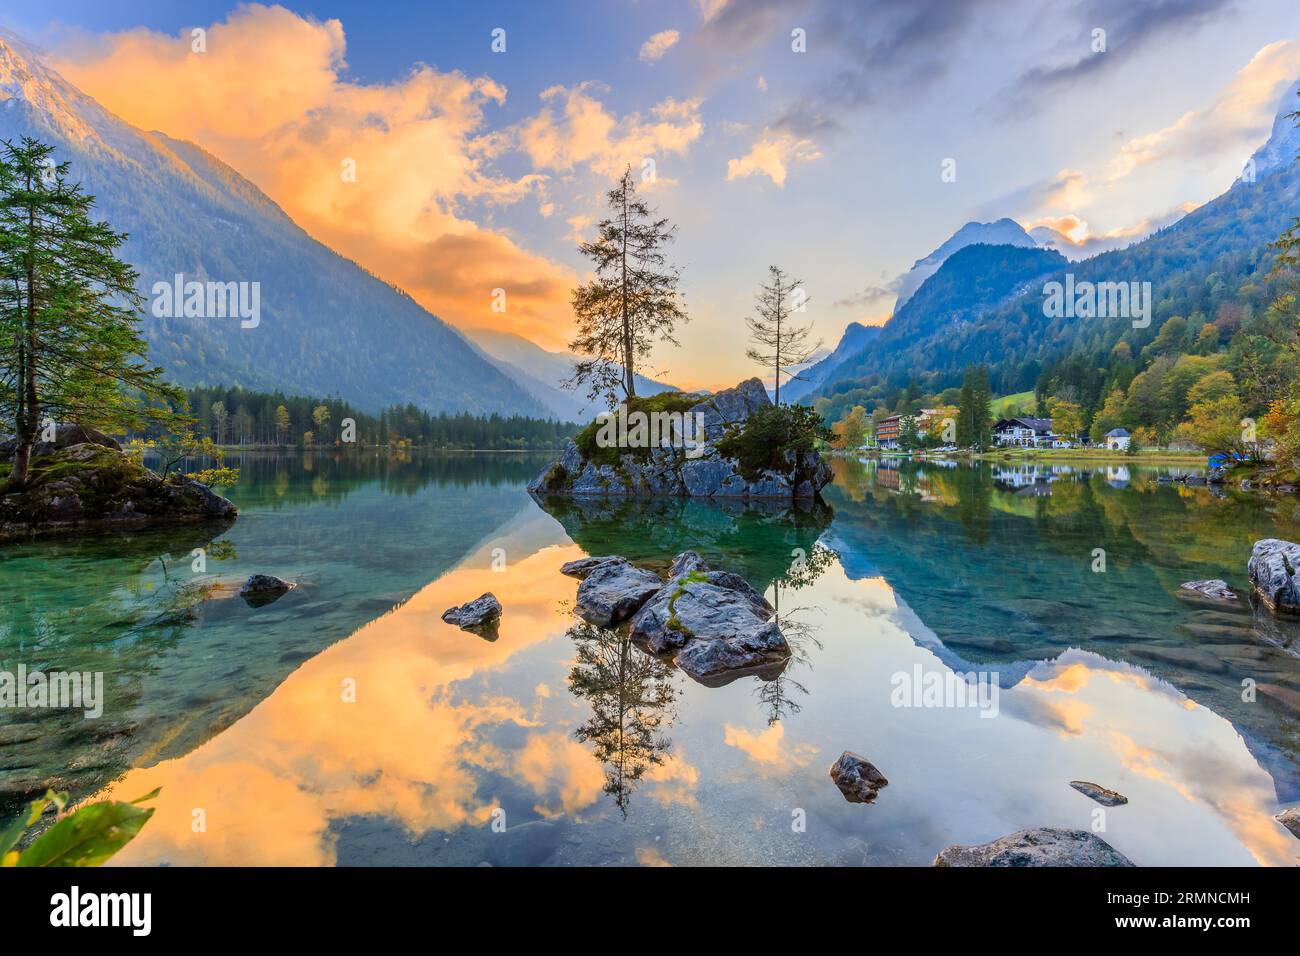 Berchtesgaden National Park, Germany. Lake Hintersee and the Bavarian Alps at sunrise. Stock Photo